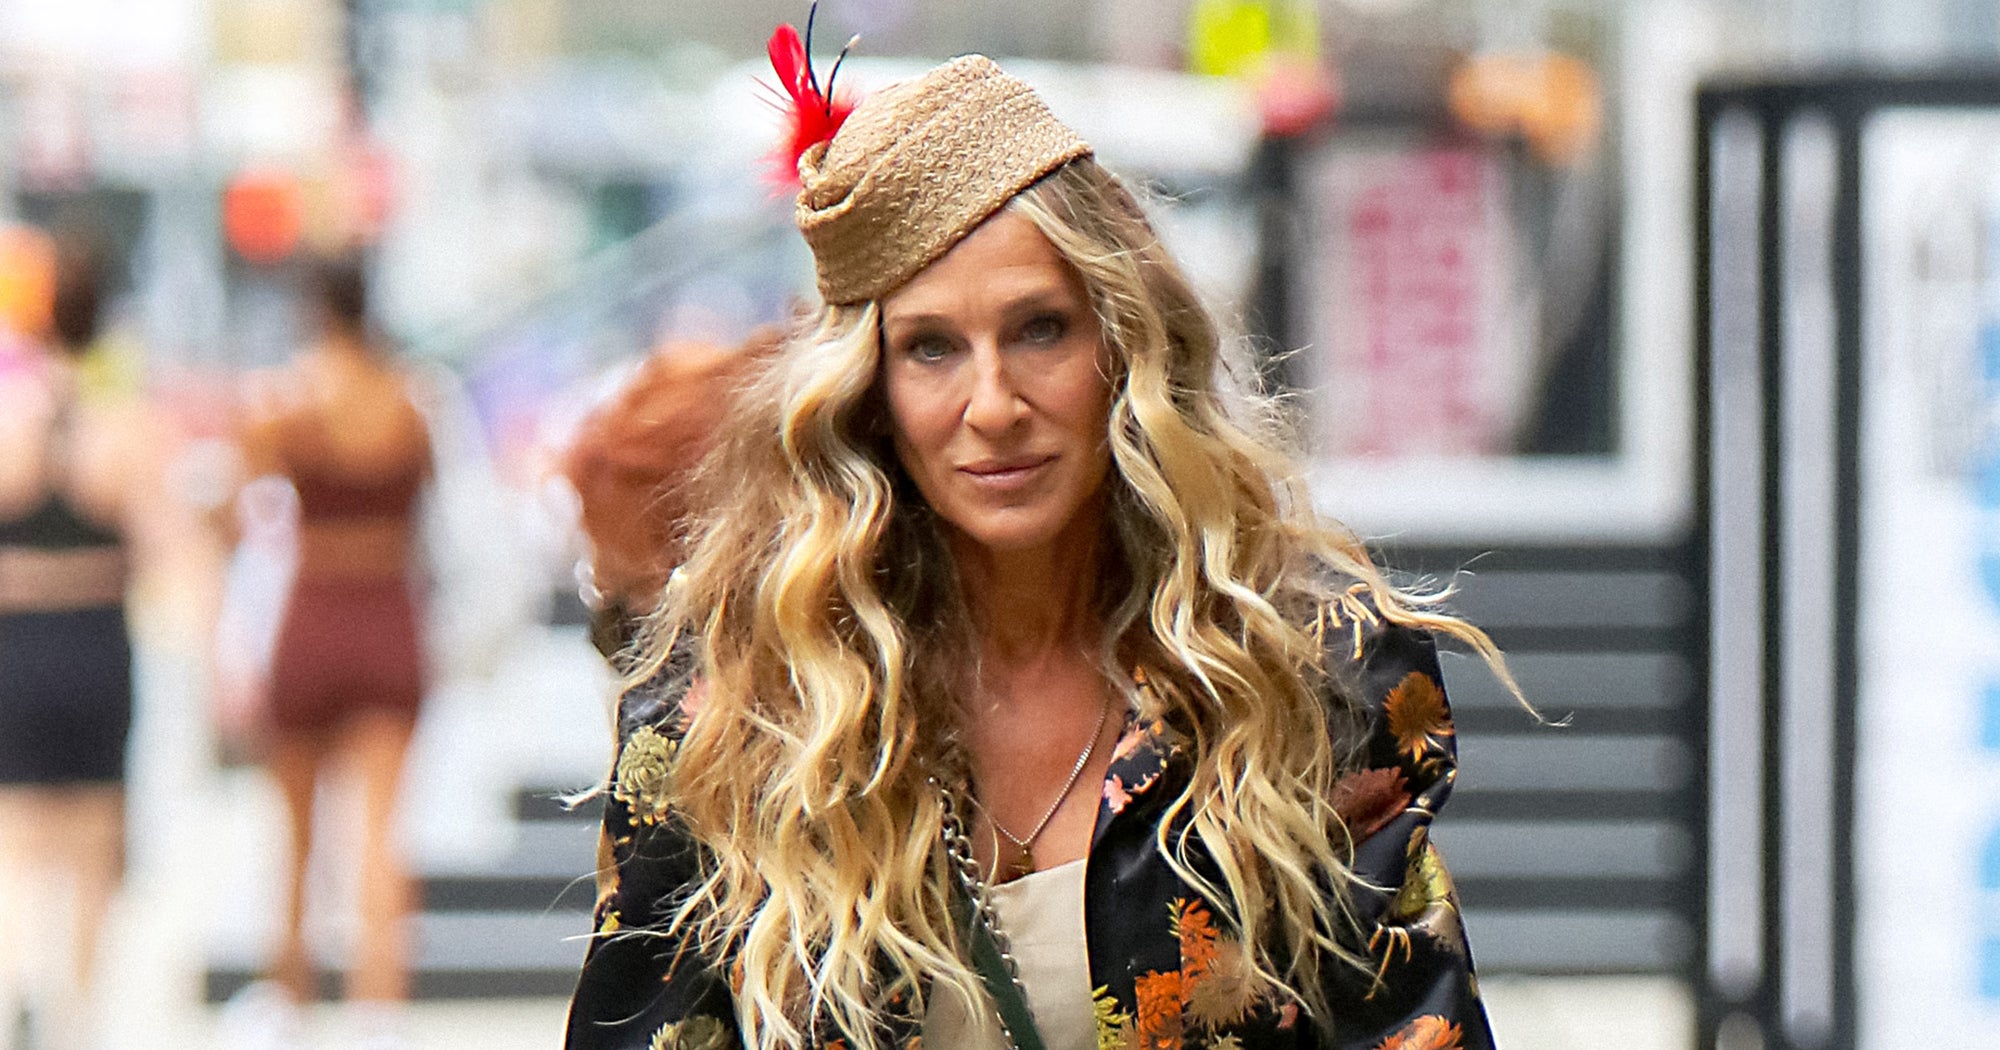 Strathberry Teams Up With Sarah Jessica Parker for Line of Handbags – WWD